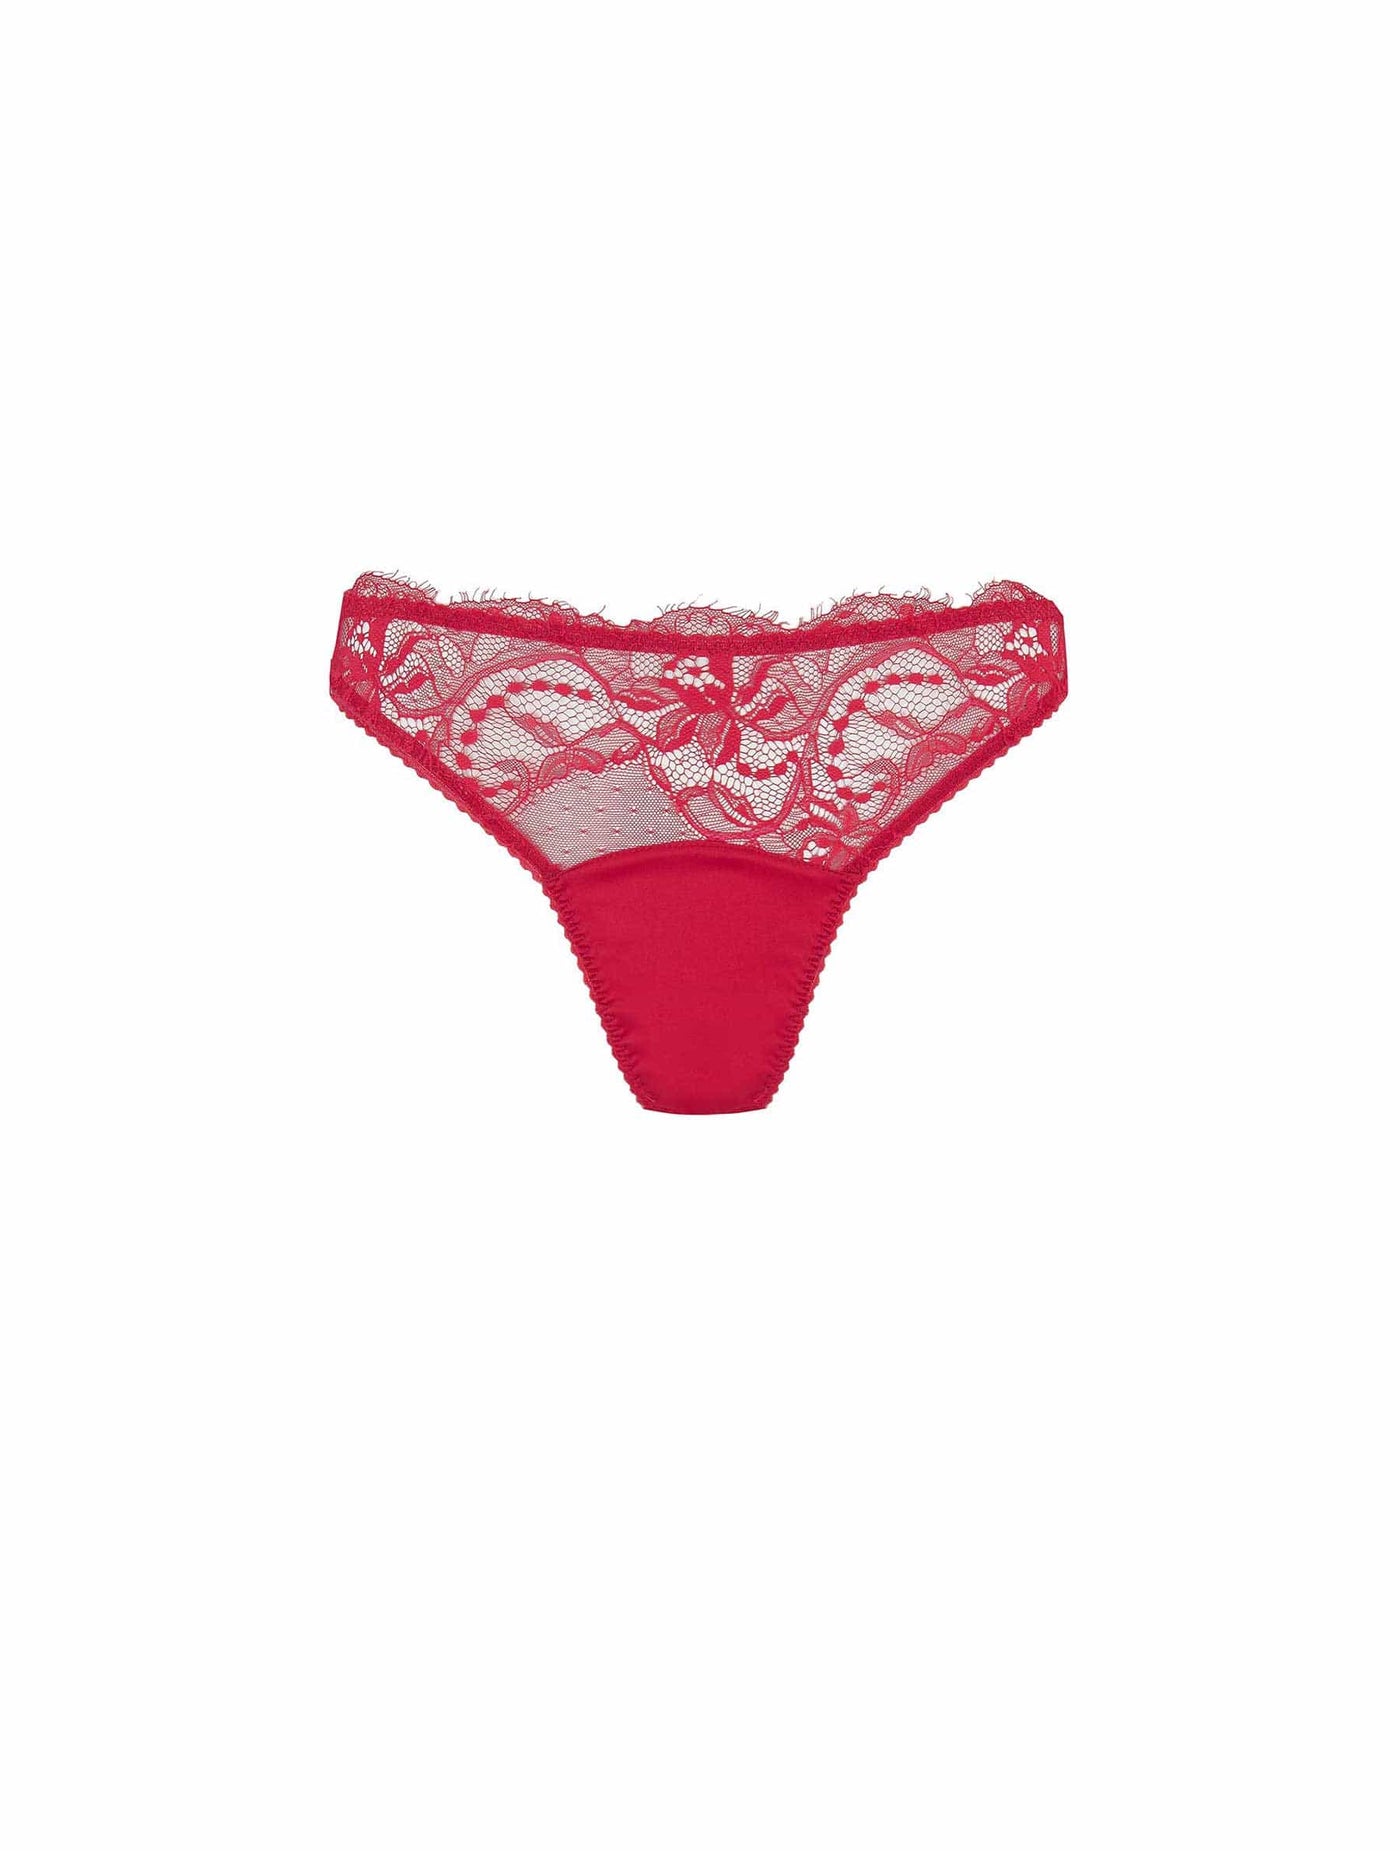 Front of Fleur of England red, lace thong from the Adeline collection.